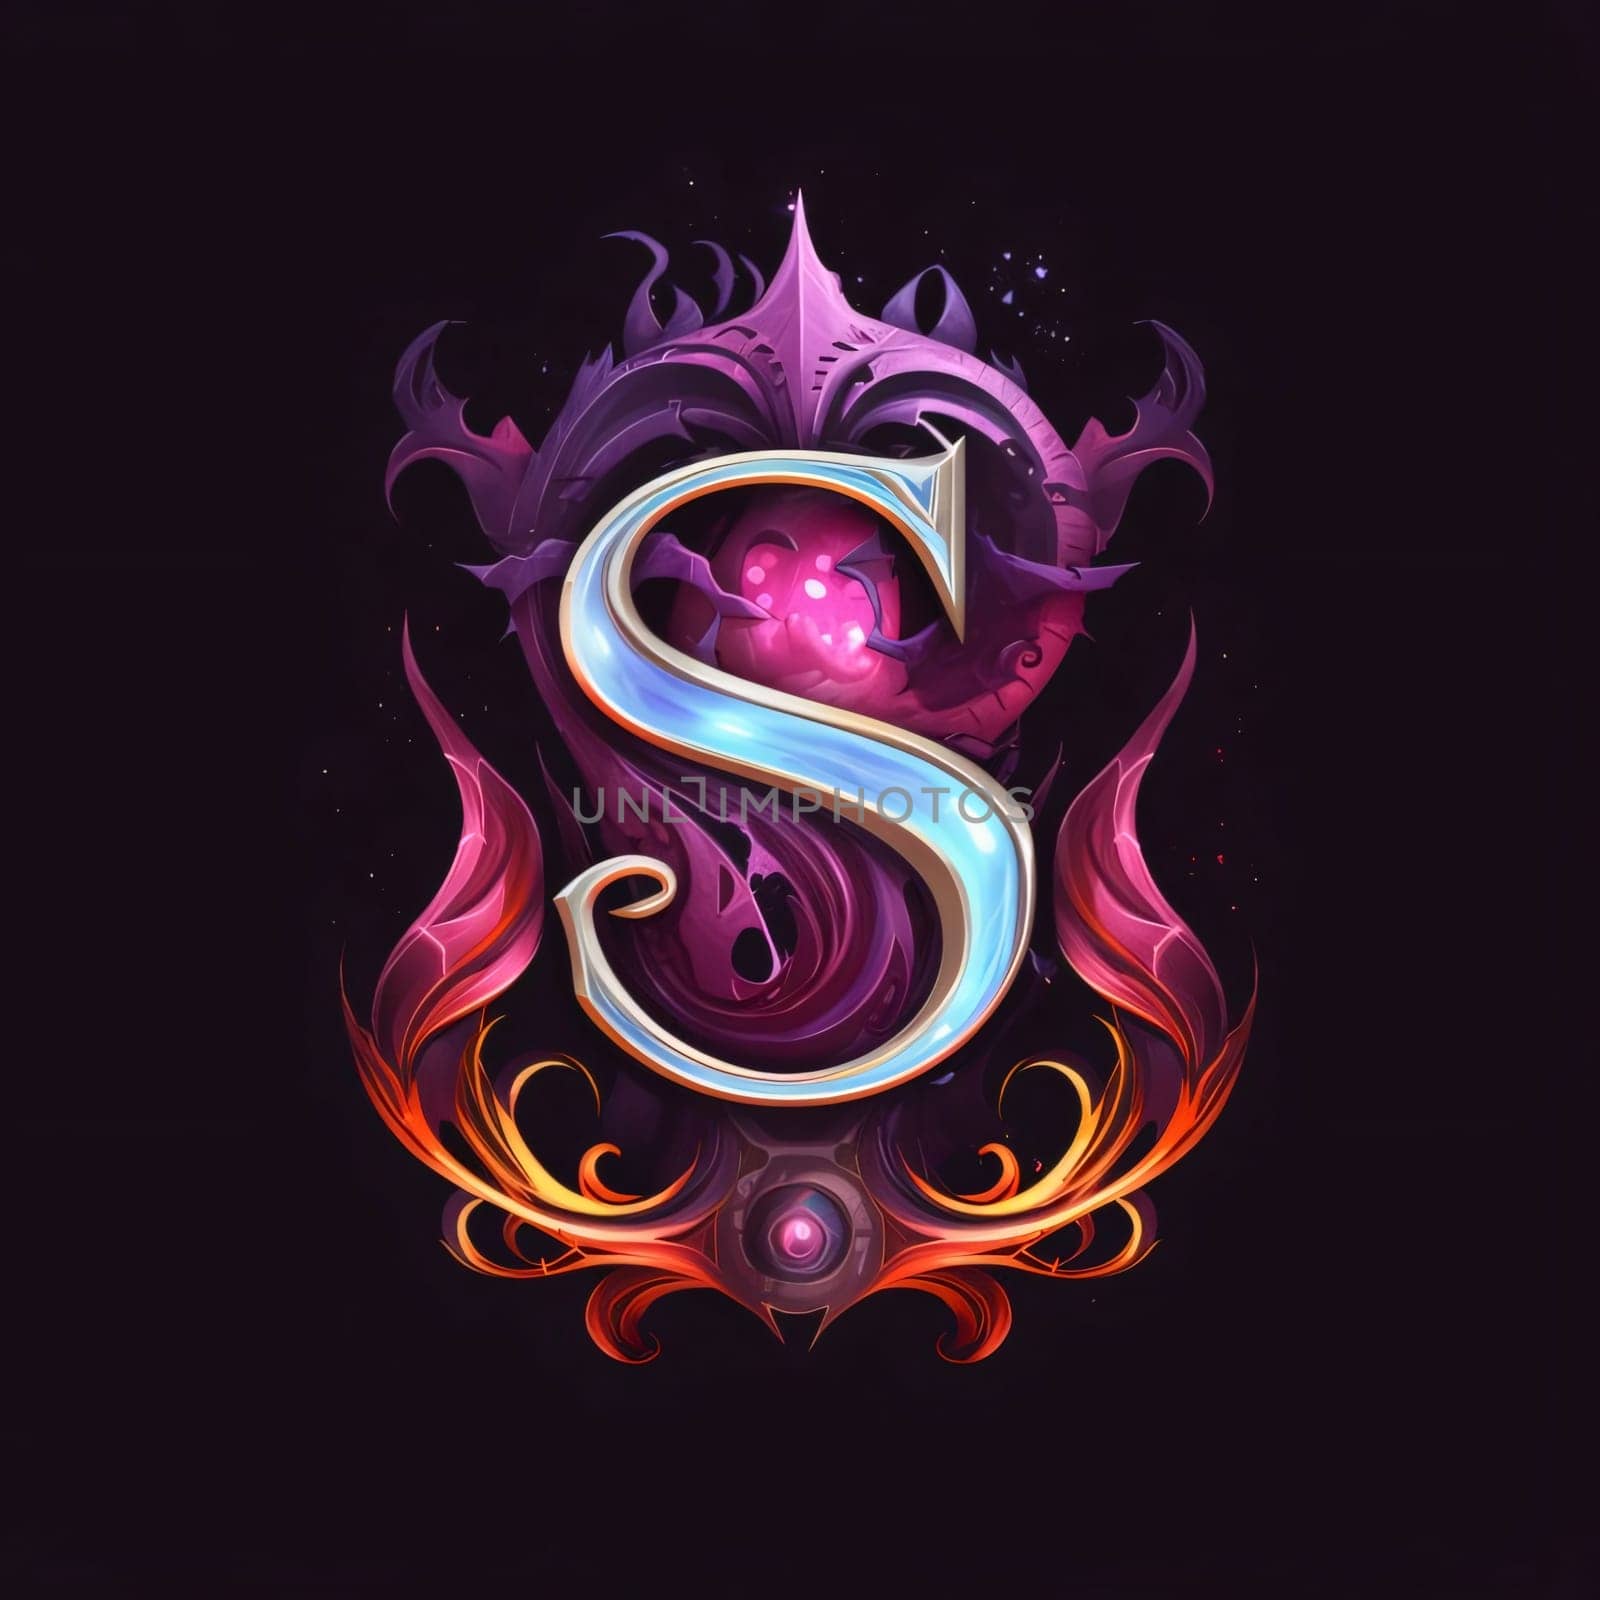 Graphic alphabet letters: Colorful letter S with ornament on black background. Vector illustration.